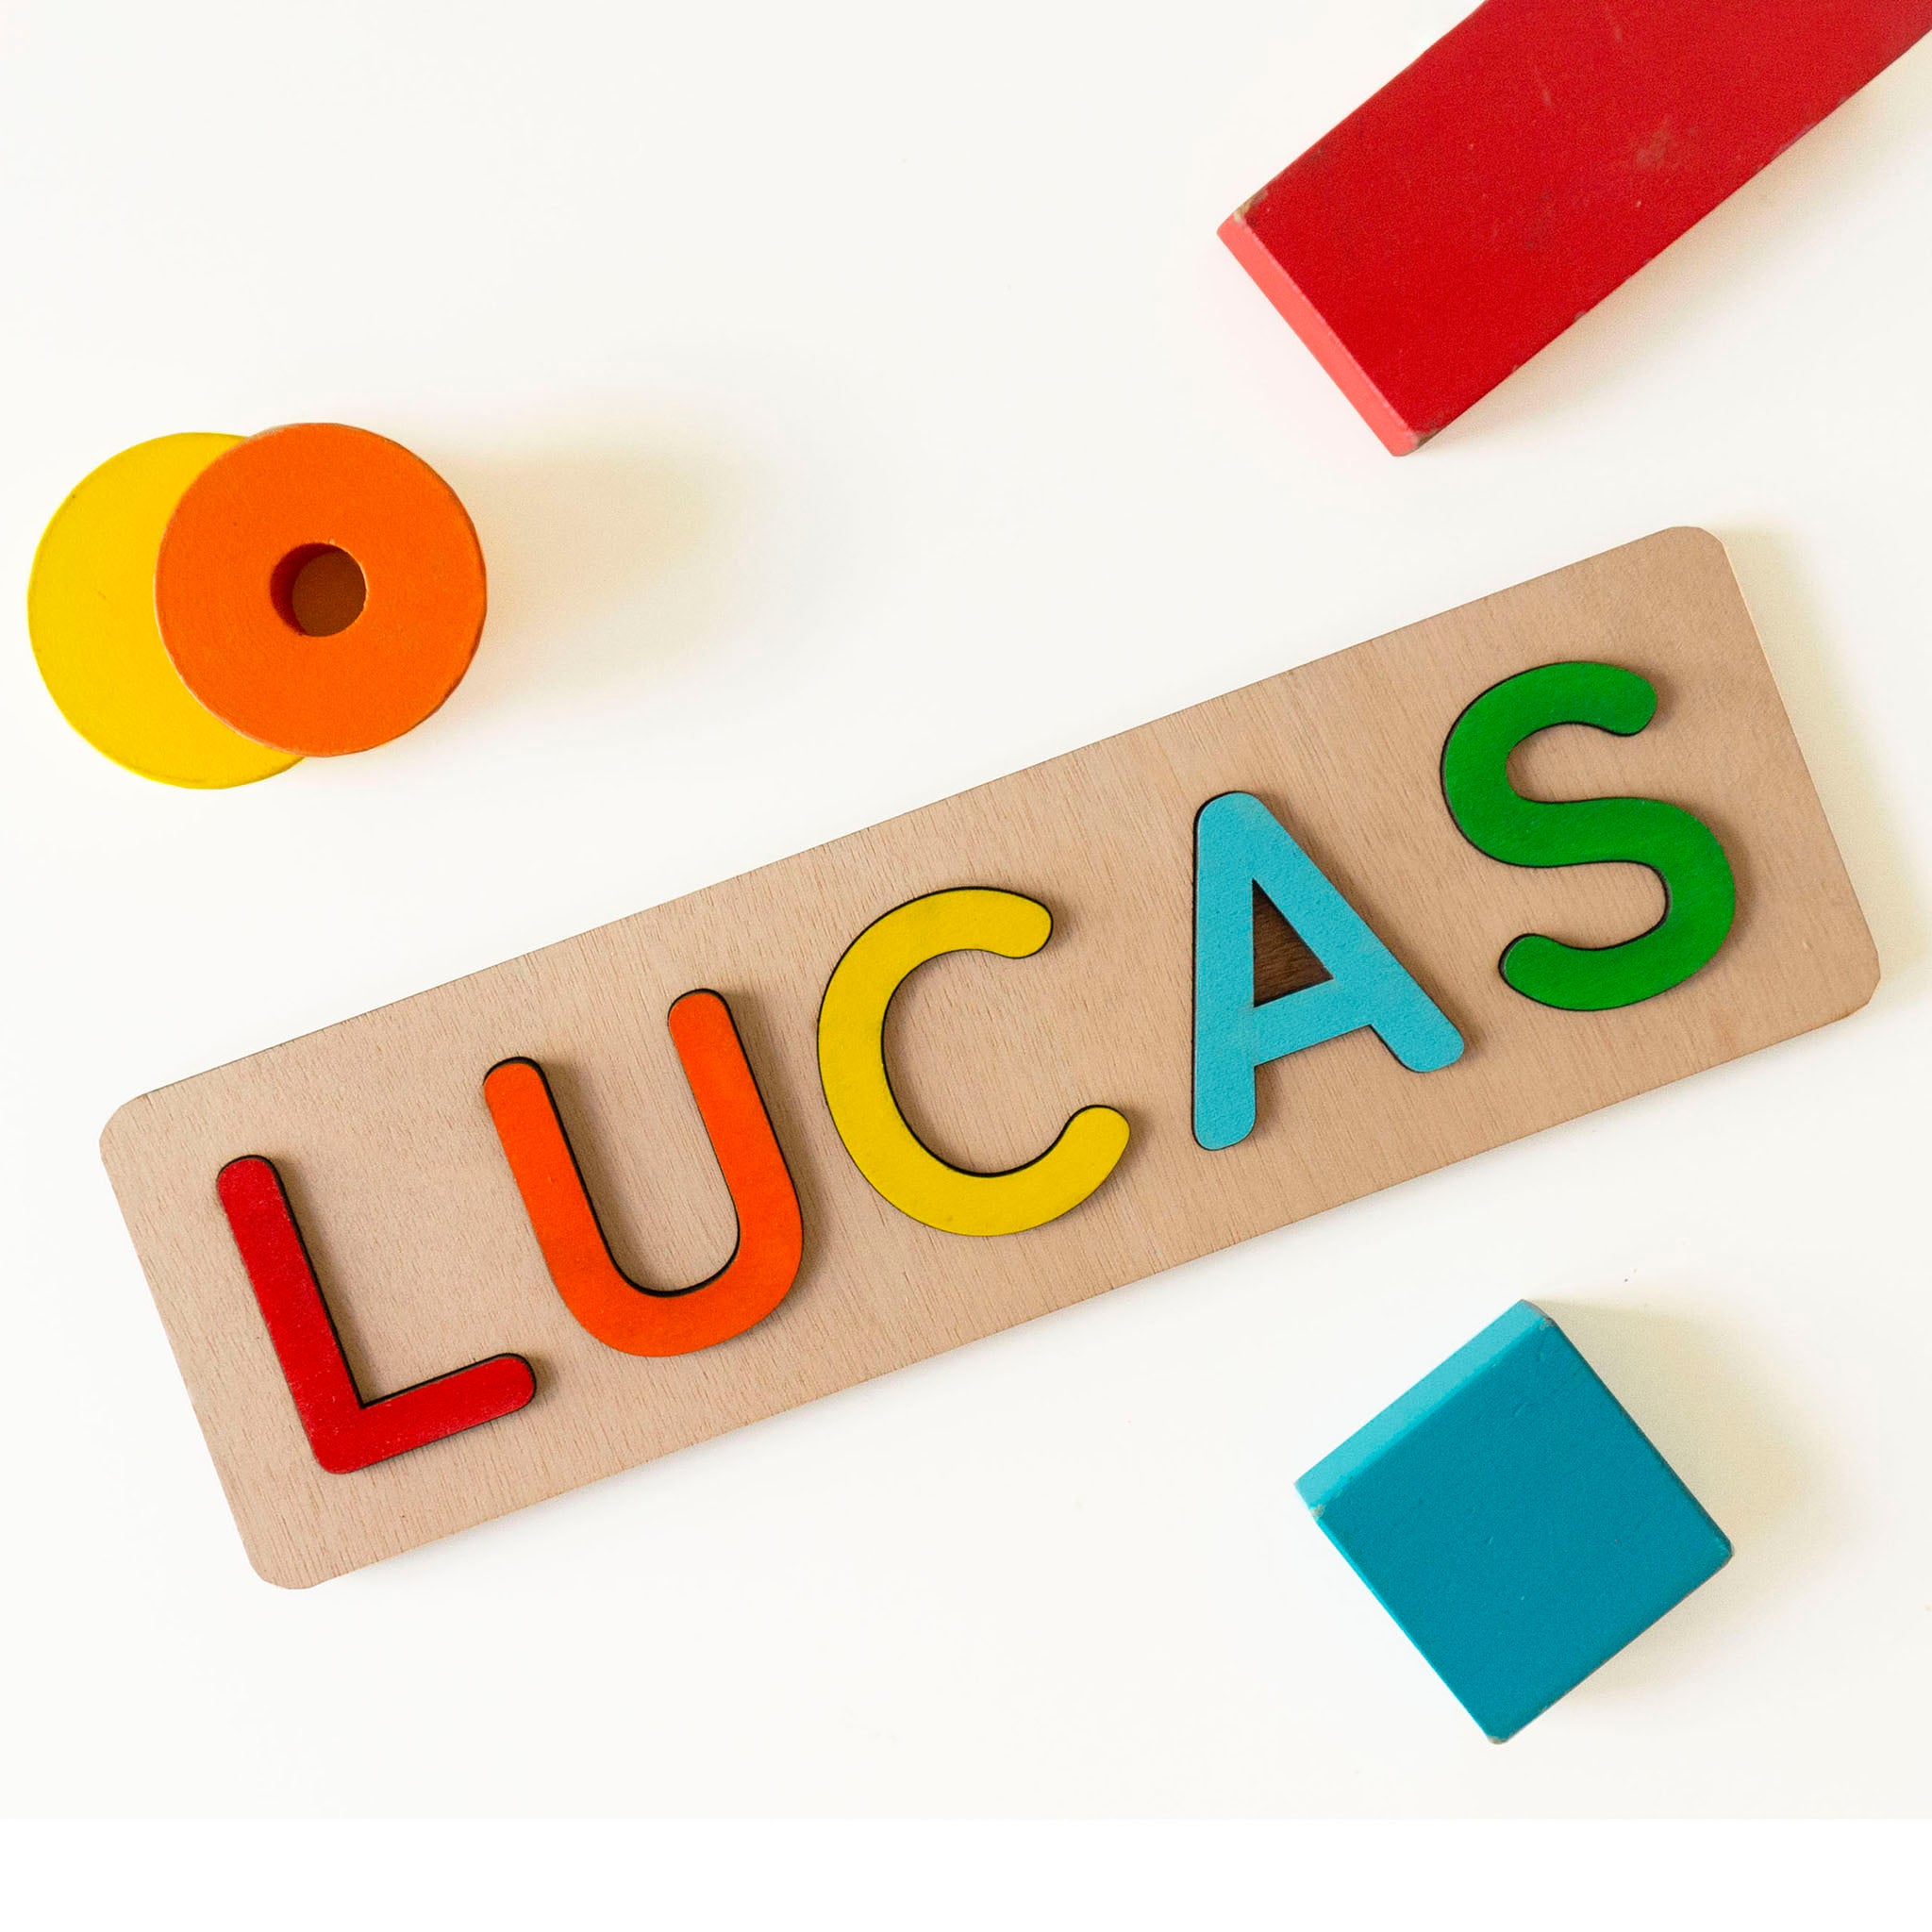 Wooden puzzle name